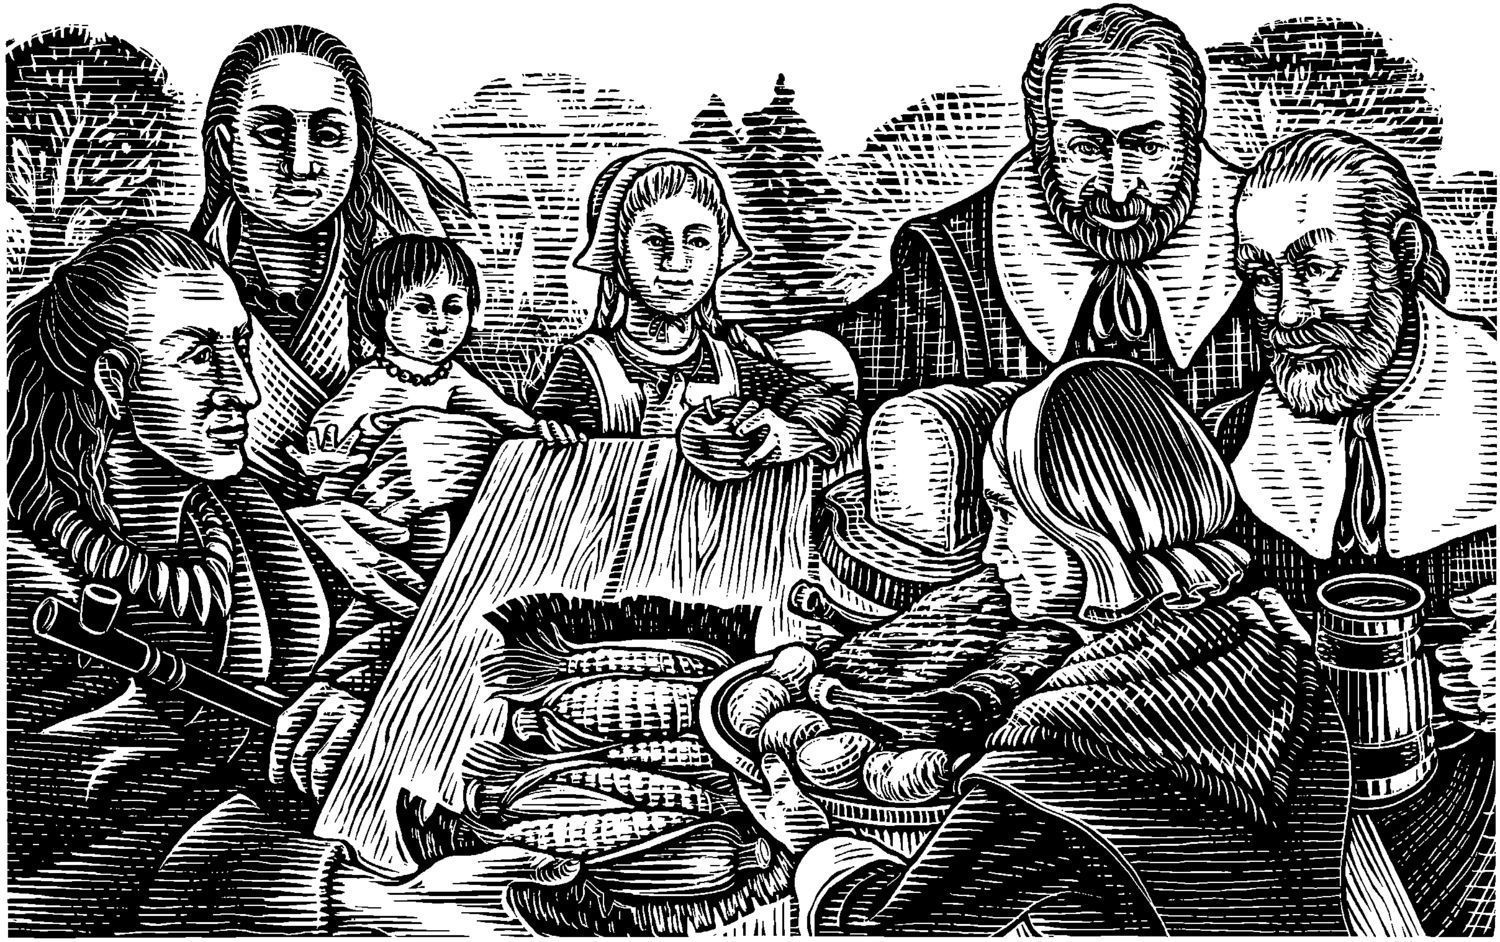 History Of Thanksgiving Facts: From The First Celebration To Why Turkey Is  On The Menu